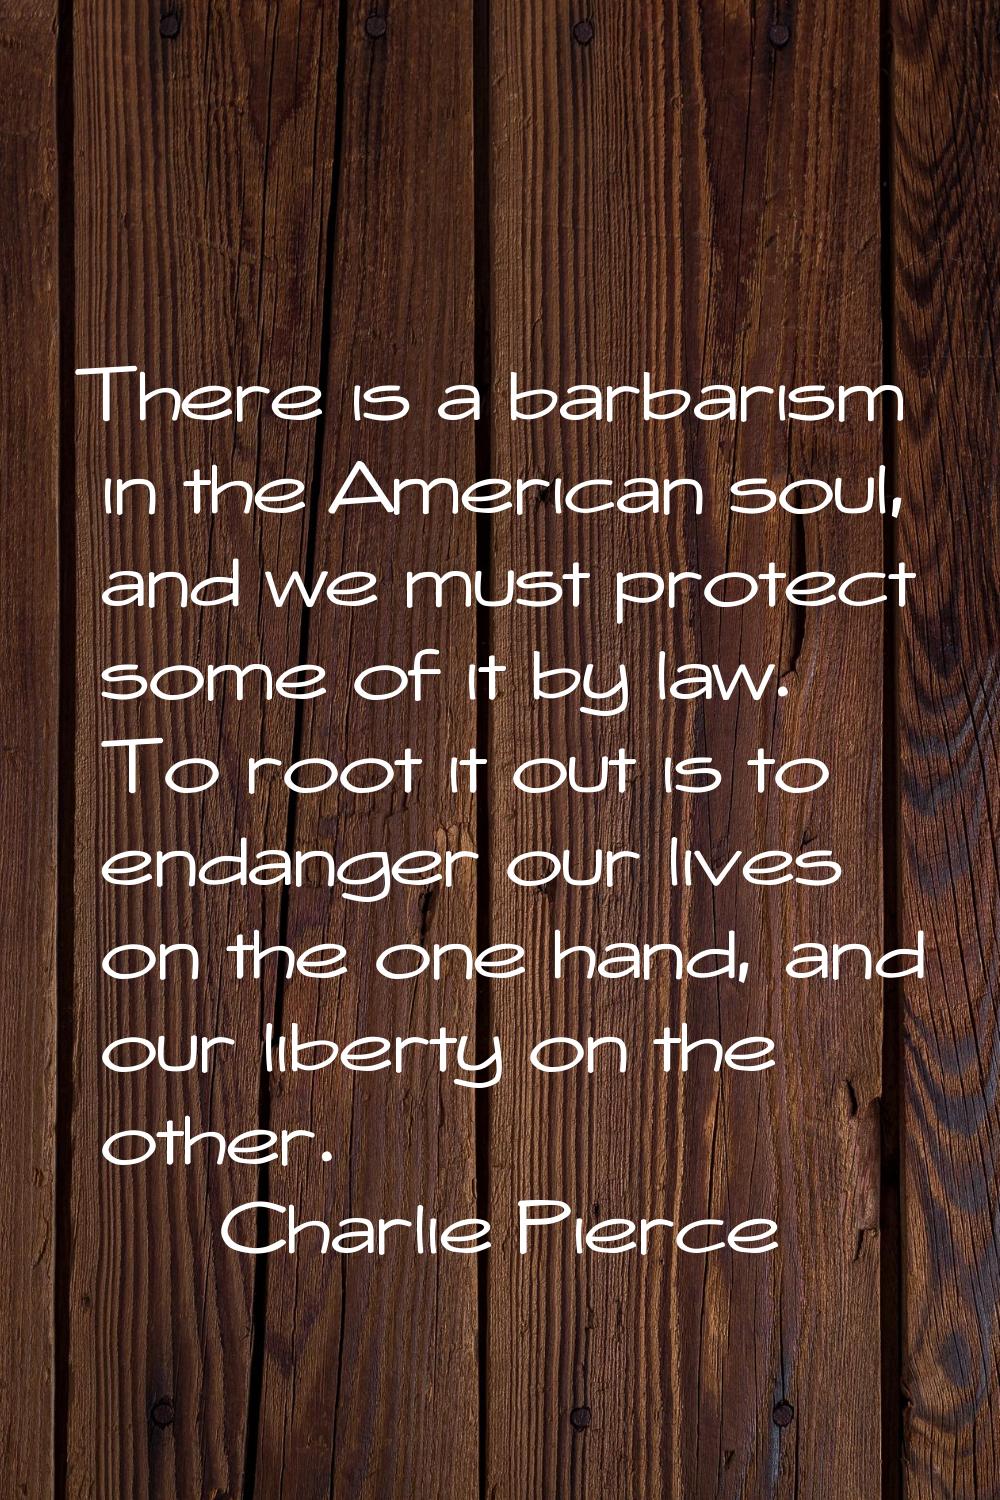 There is a barbarism in the American soul, and we must protect some of it by law. To root it out is